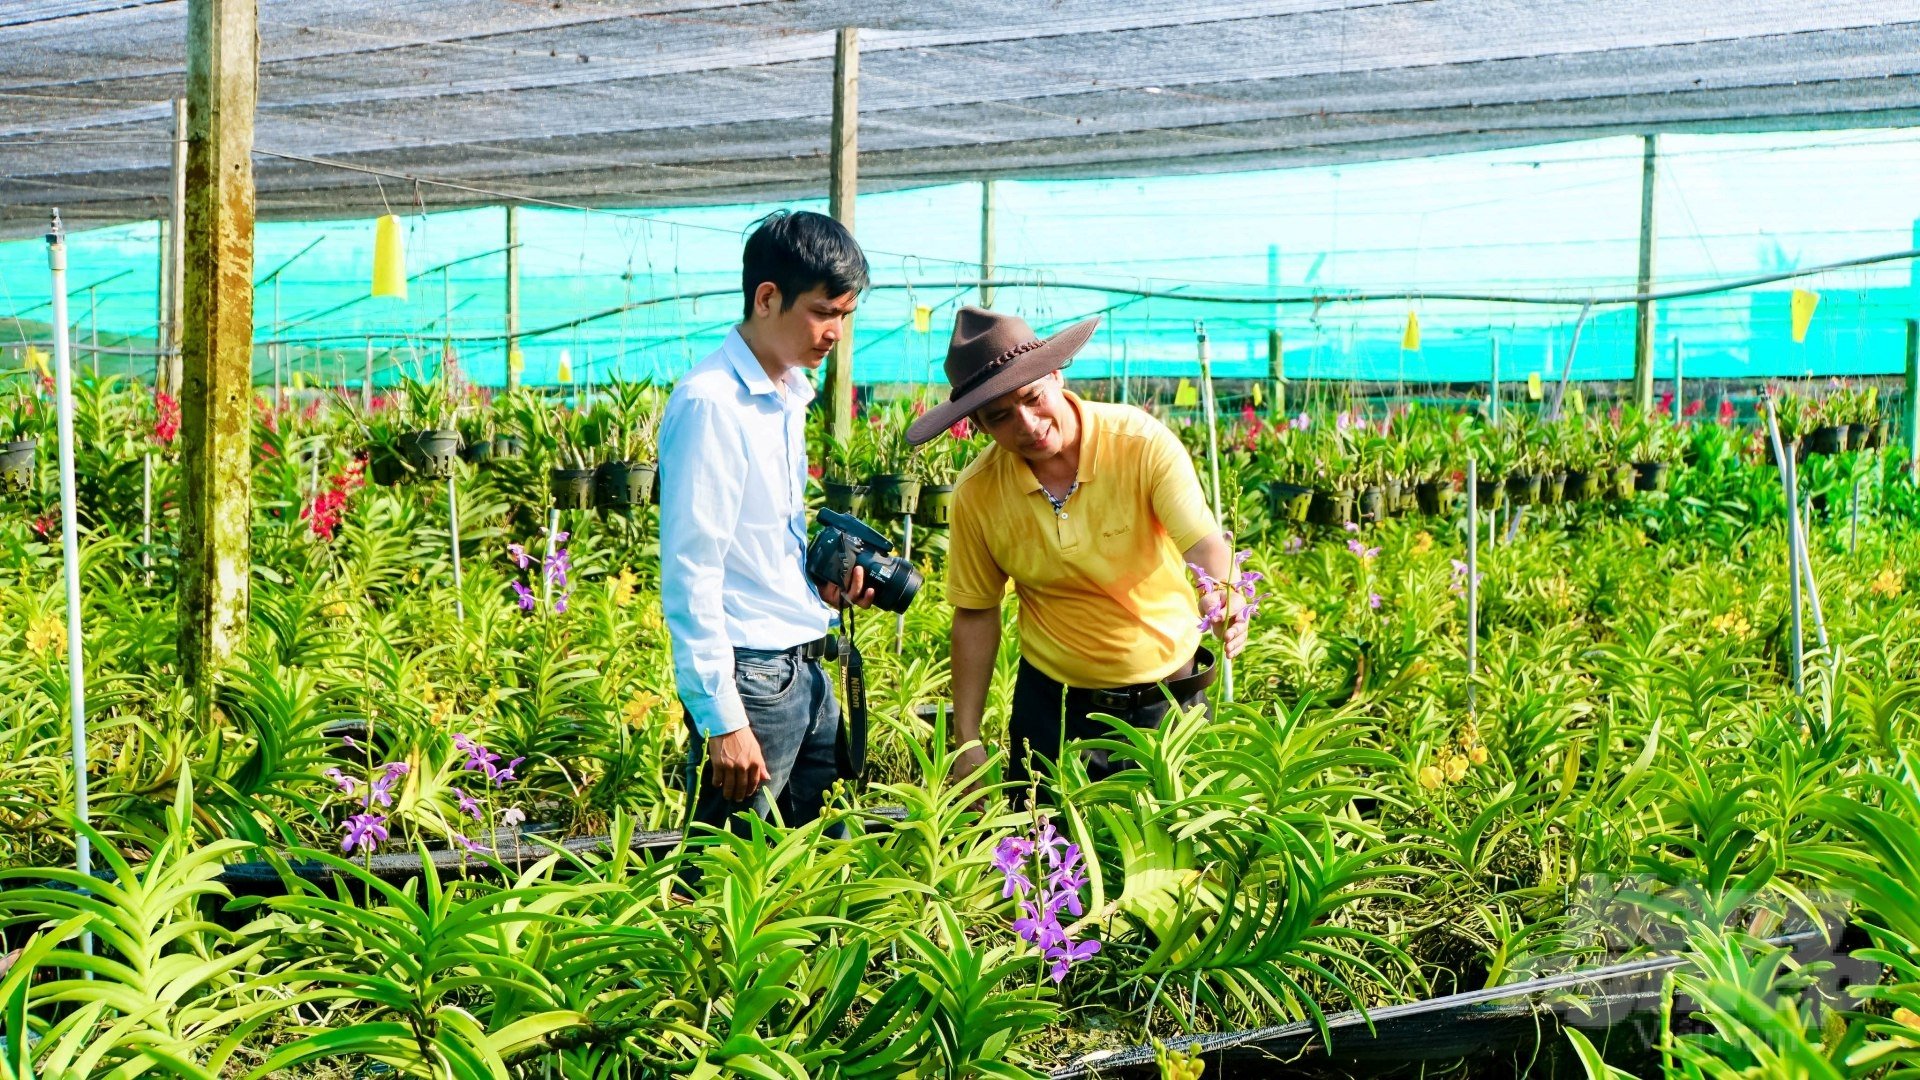 The Vietnam Agriculture Newspaper reporter was introduced by the owner of the orchid garden Hoang Hoa about the orchid lines and the orchid care process on the sunny, windy land of Tay Ninh. Photo: Le Binh.